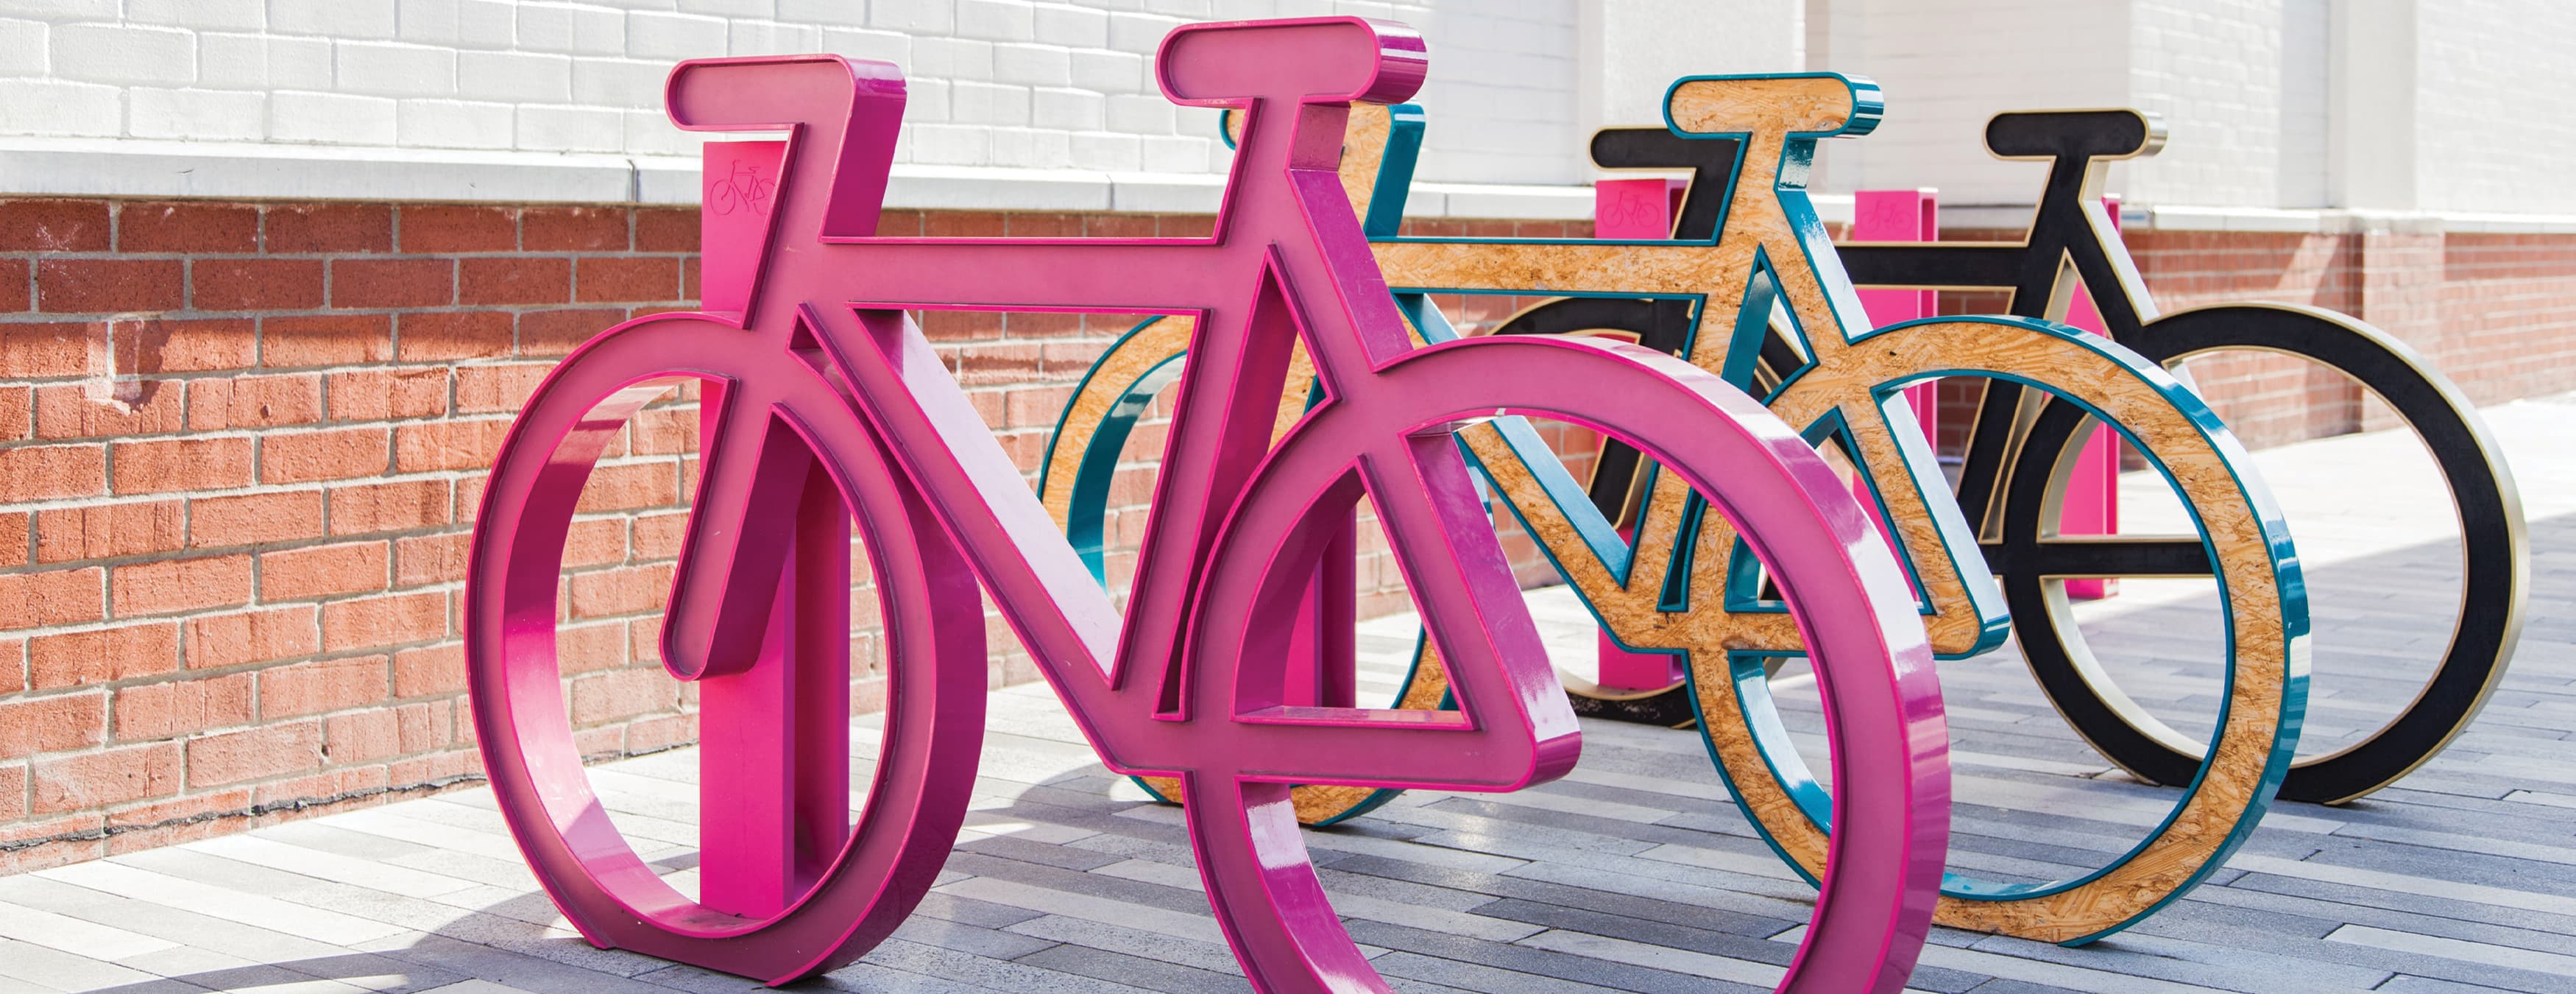 Sculptural artistic bike rack with large metal bikes in pink, blue and black colors with brick wall in the background